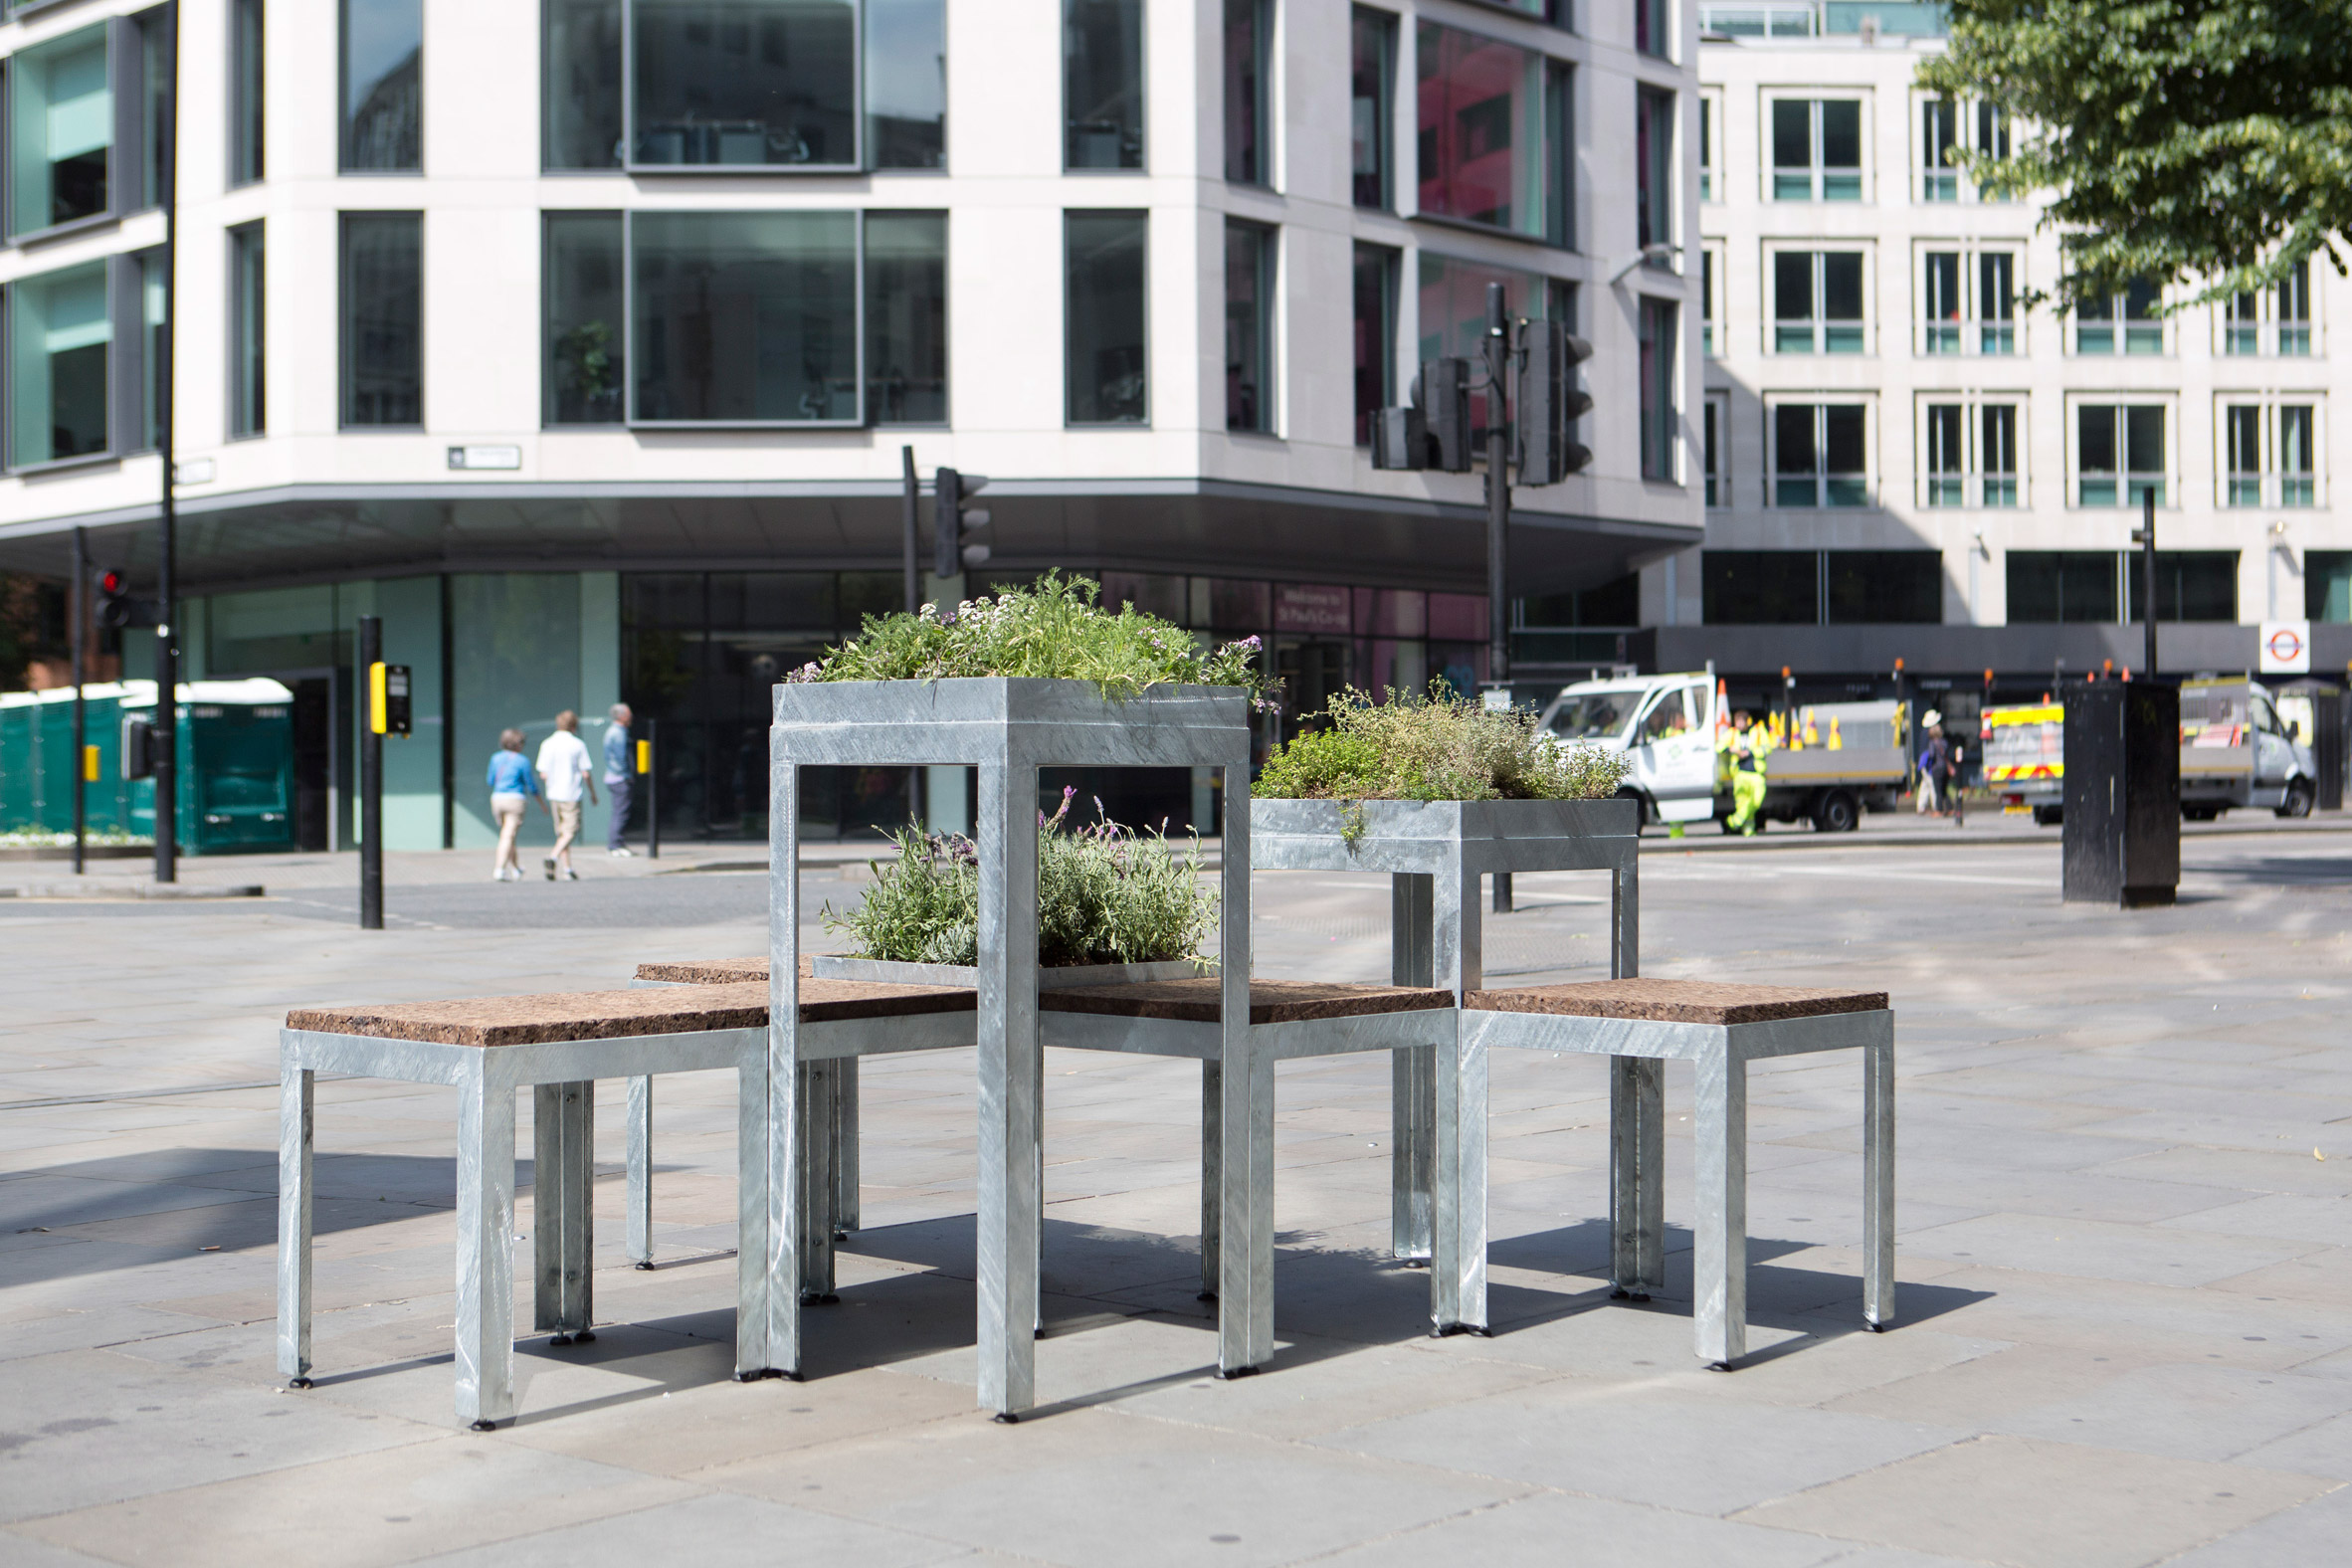 London Festival of Architecture City Benches